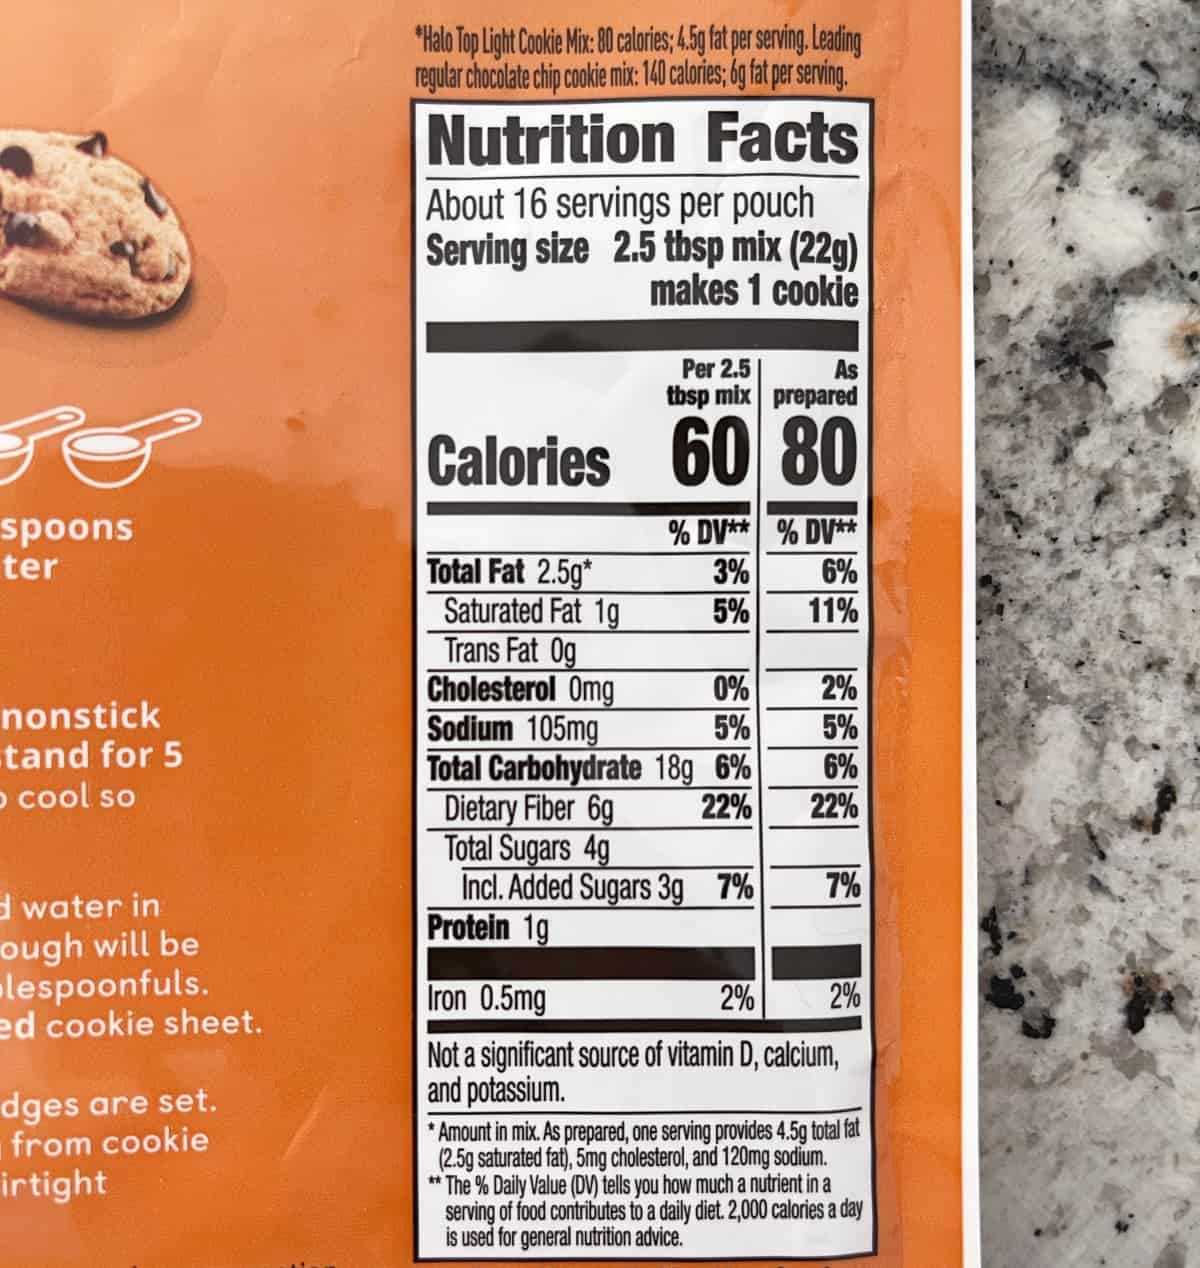 Halo Top packaged light peanut butter chocolate chip cookies nutrition label.